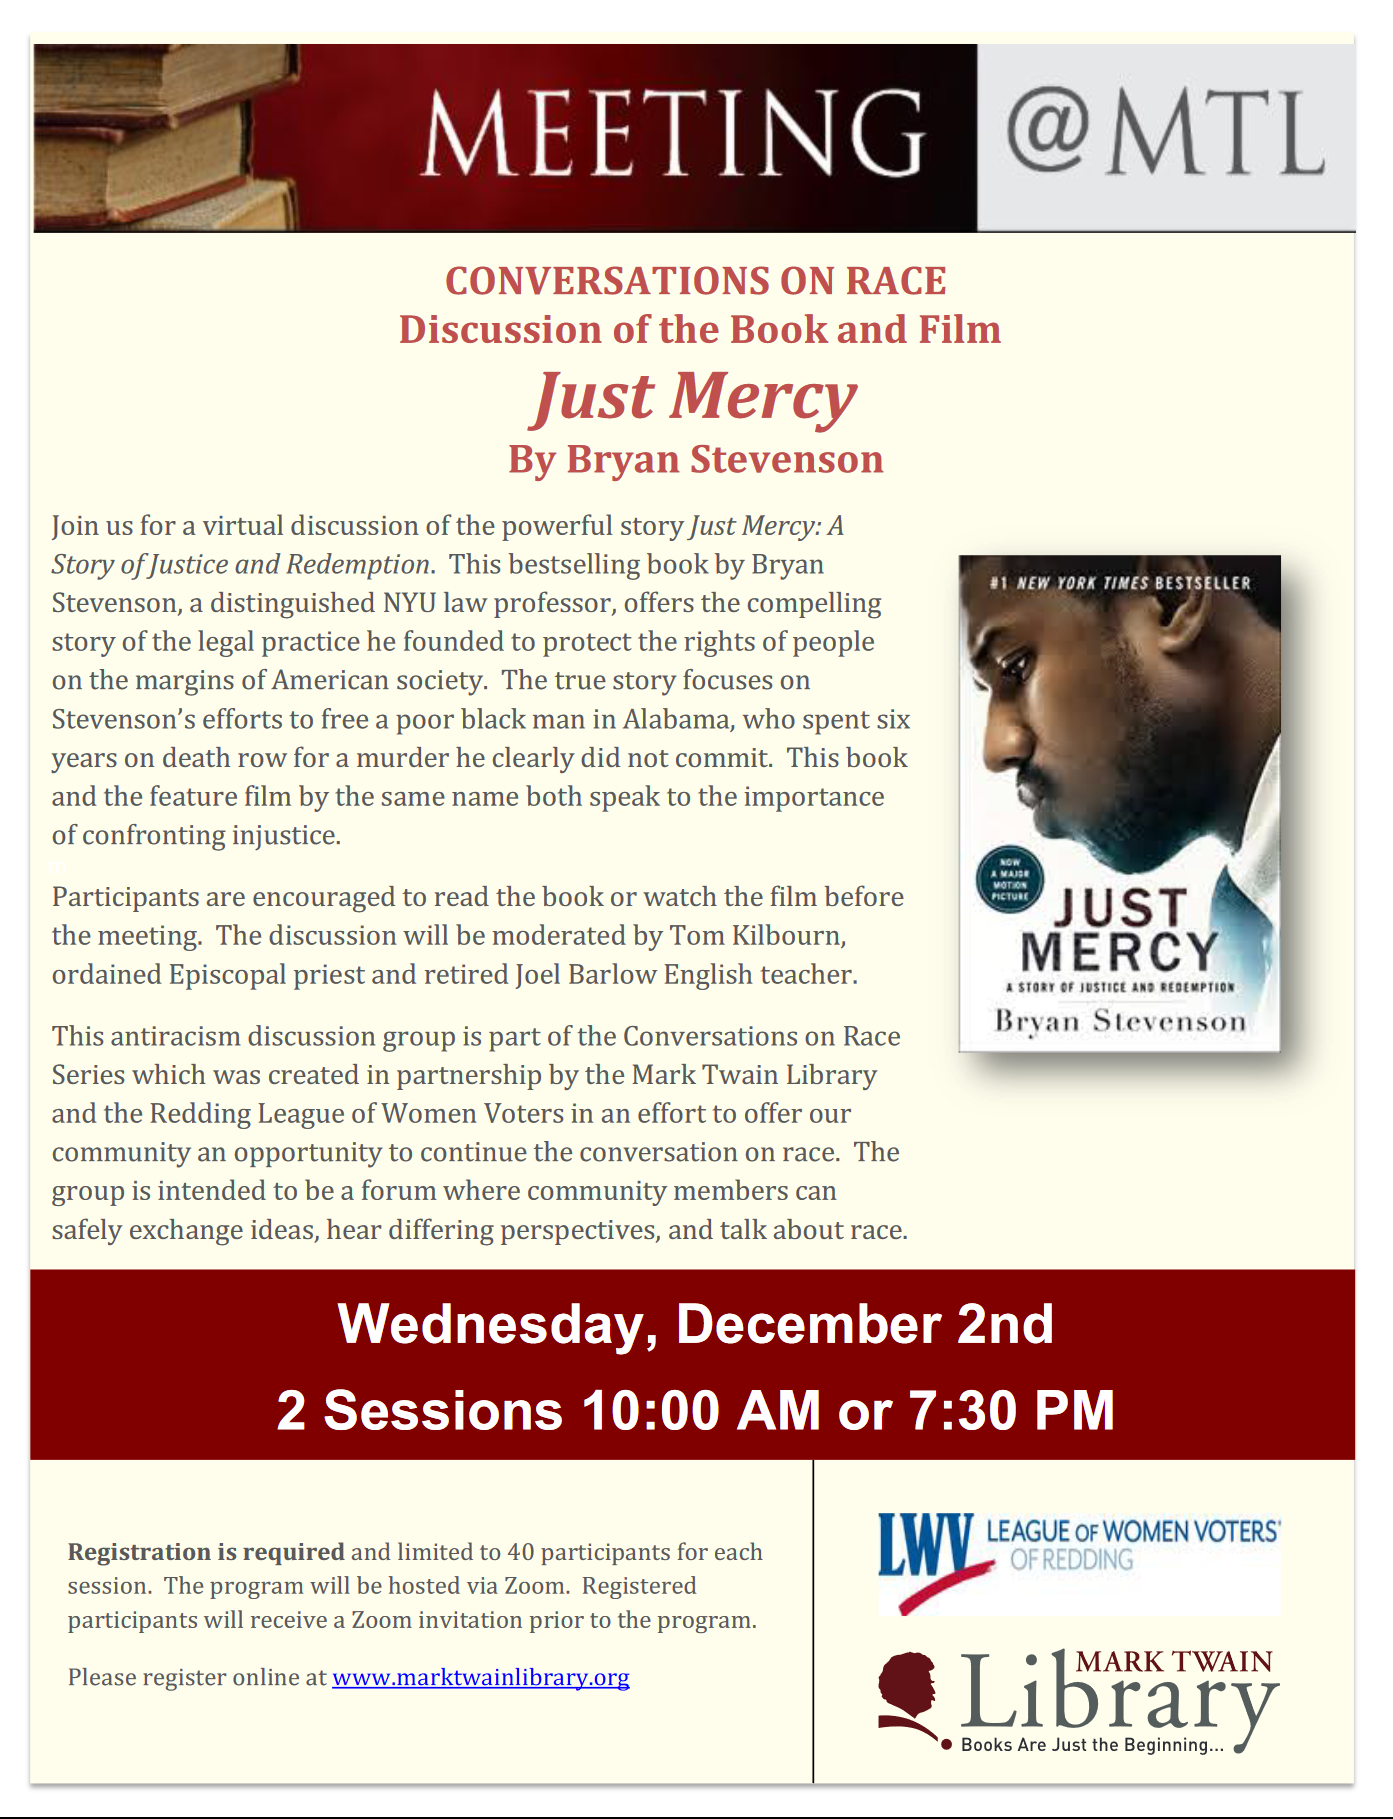 Conversations on Race Just Mercy Virtual Event Flyer December 2 2020